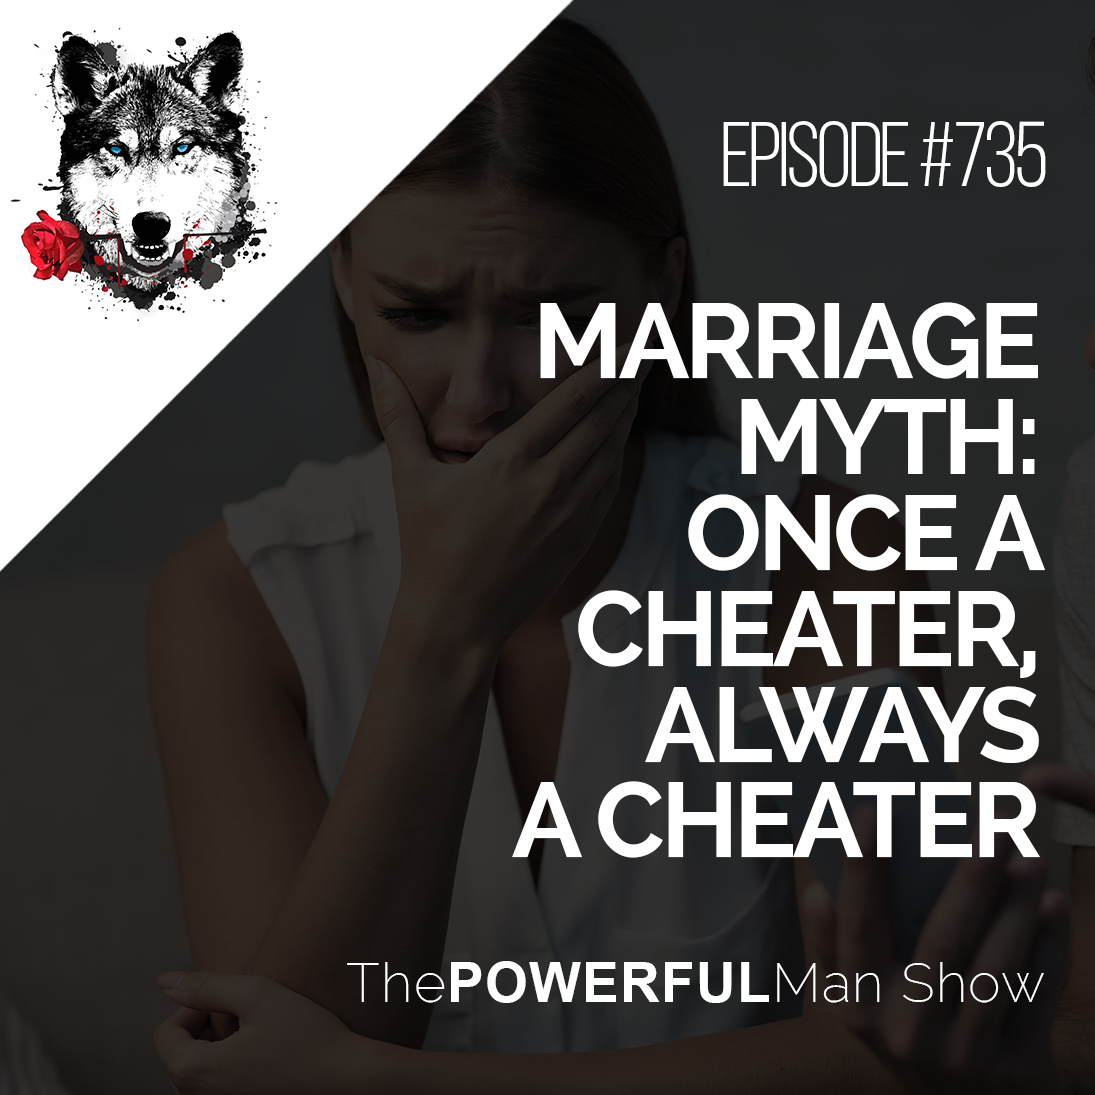 Marriage Myth: Once A Cheater, Always A Cheater